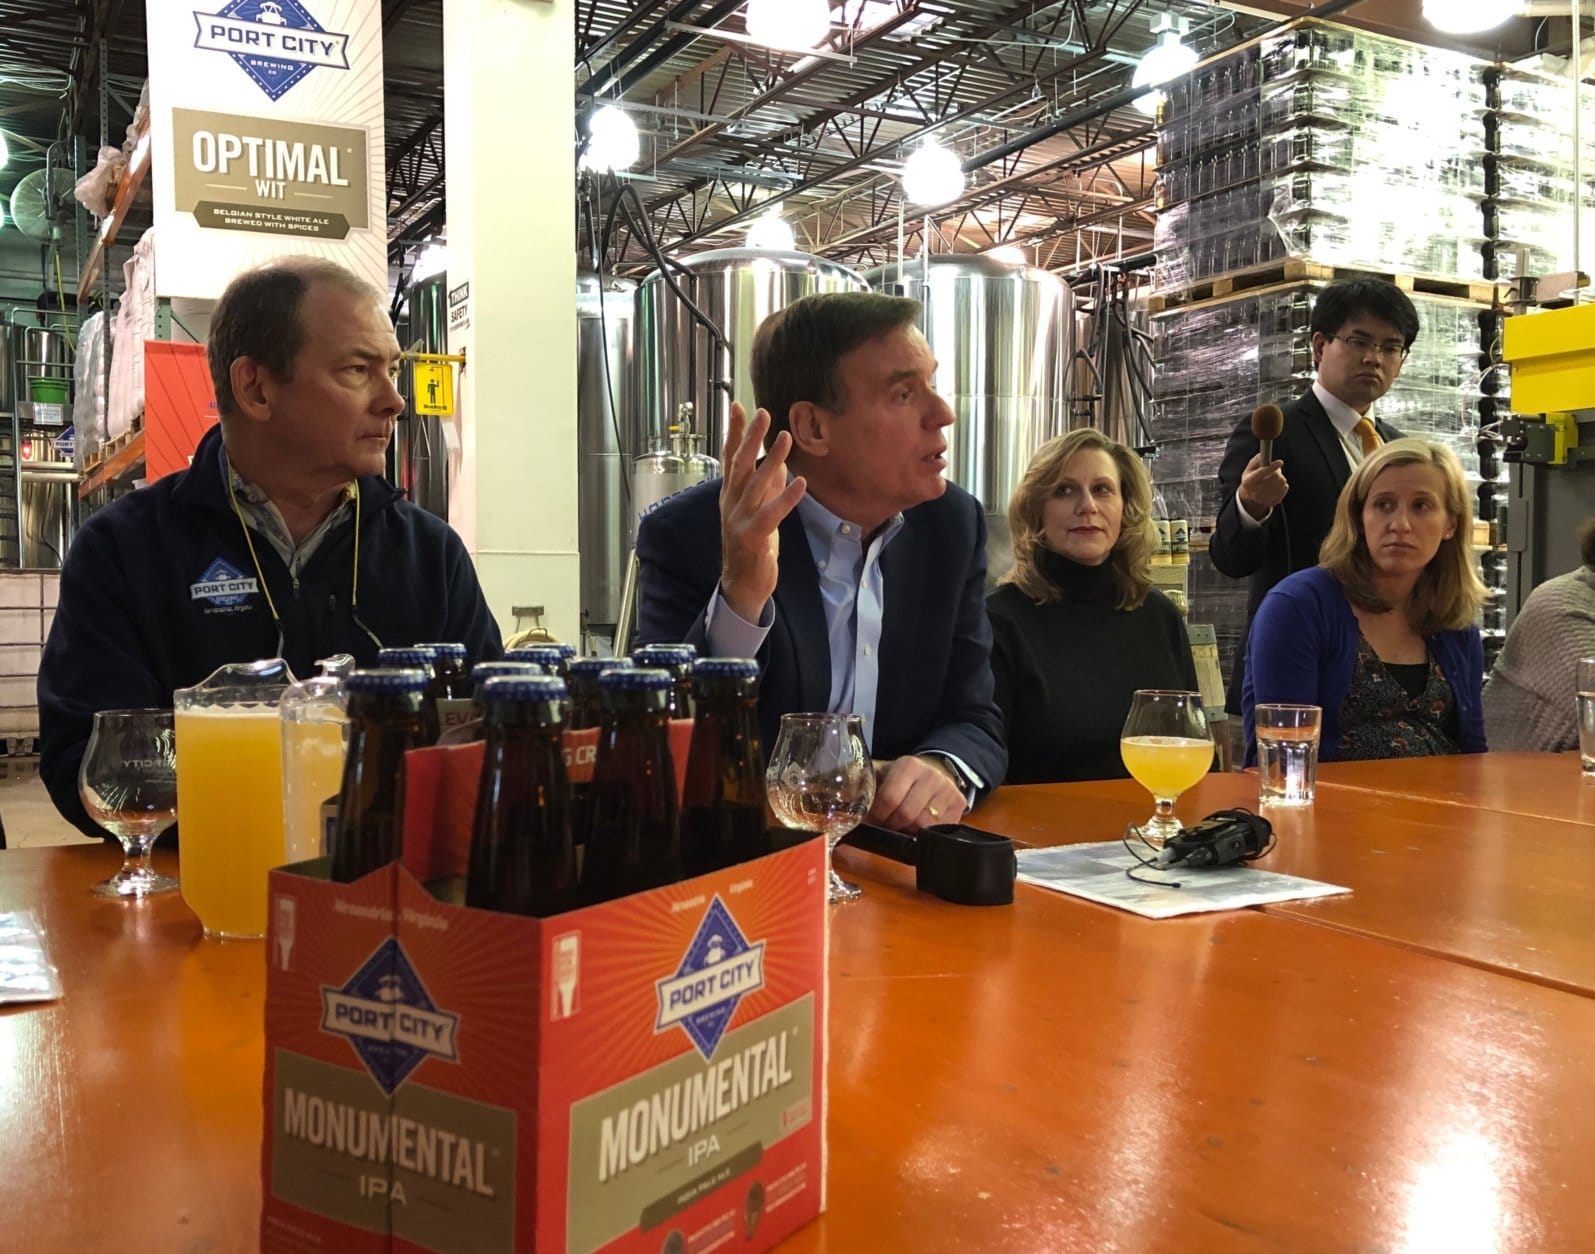 Sen. Mark Warner, D-Va., sponsored the gathering Wednesday at the Port City Brewing Company in Alexandria, Virginia, where founder and CEO Bill Butcher talked about issues shared by craft brewers locally and nationwide. (WTOP/Kristi King)